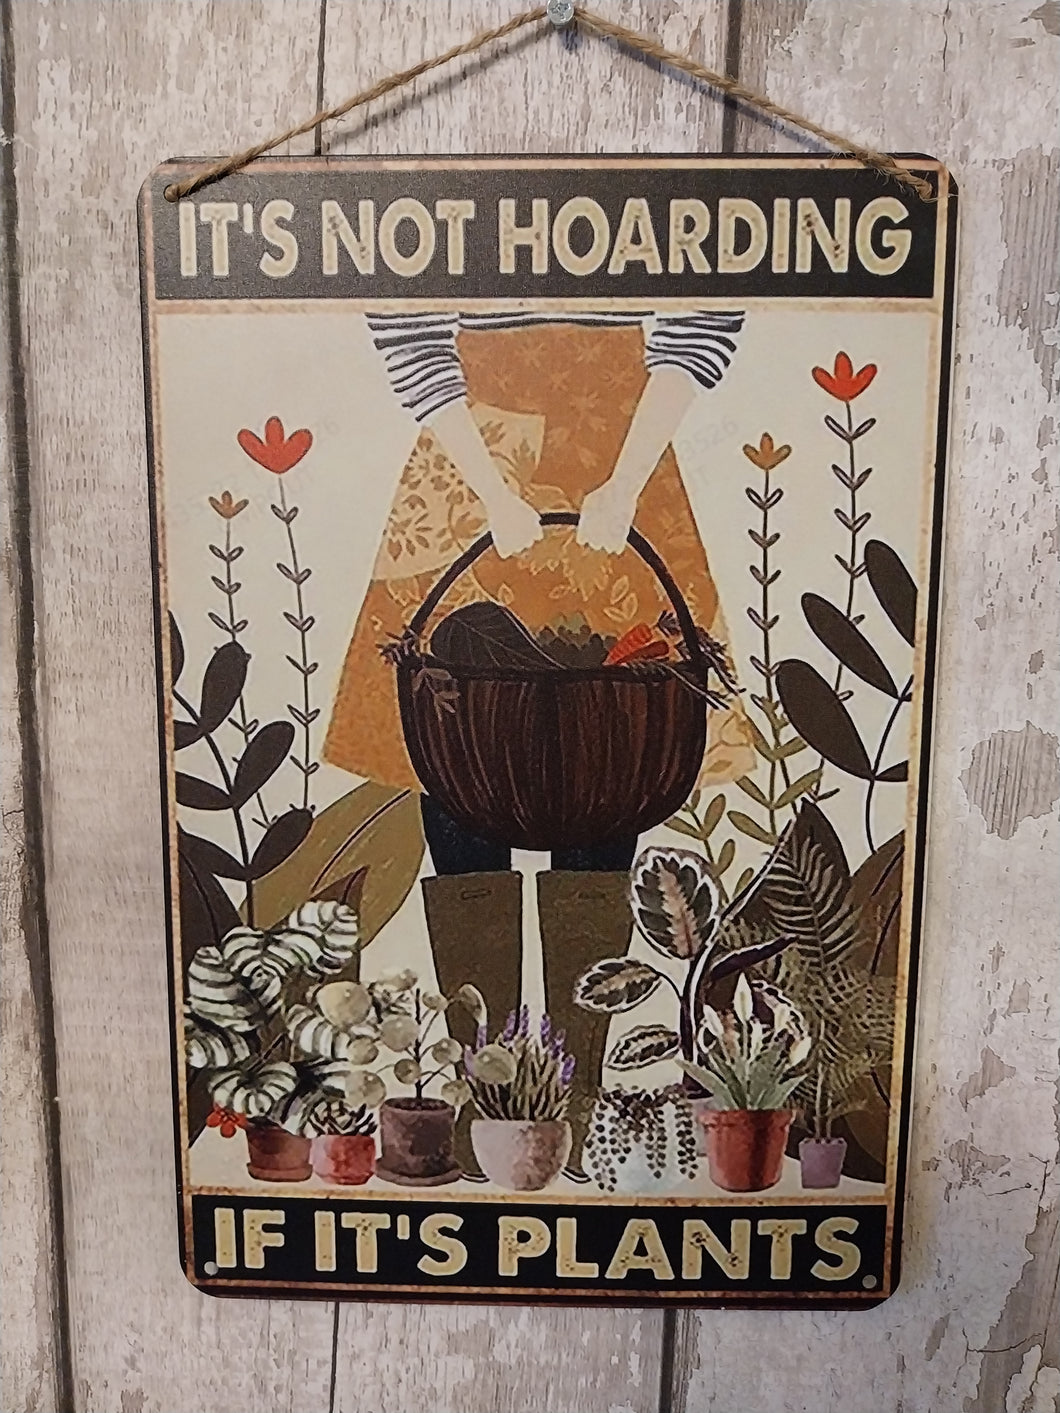 Its not hoarding if its plants garden sign